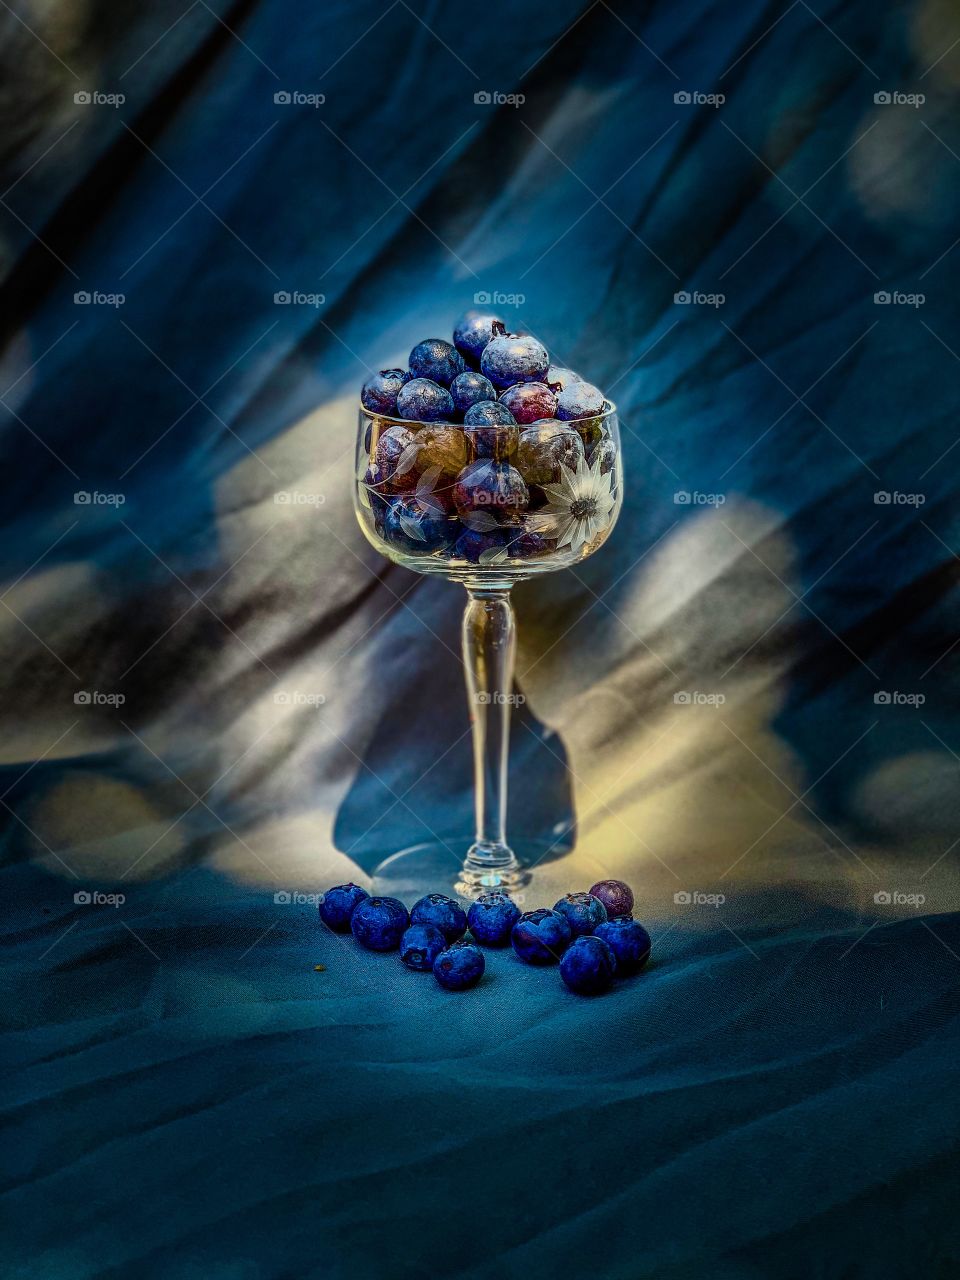 Ripe blueberries sitting in a vintage glass. They wait for a hungry person in search of something sweet.